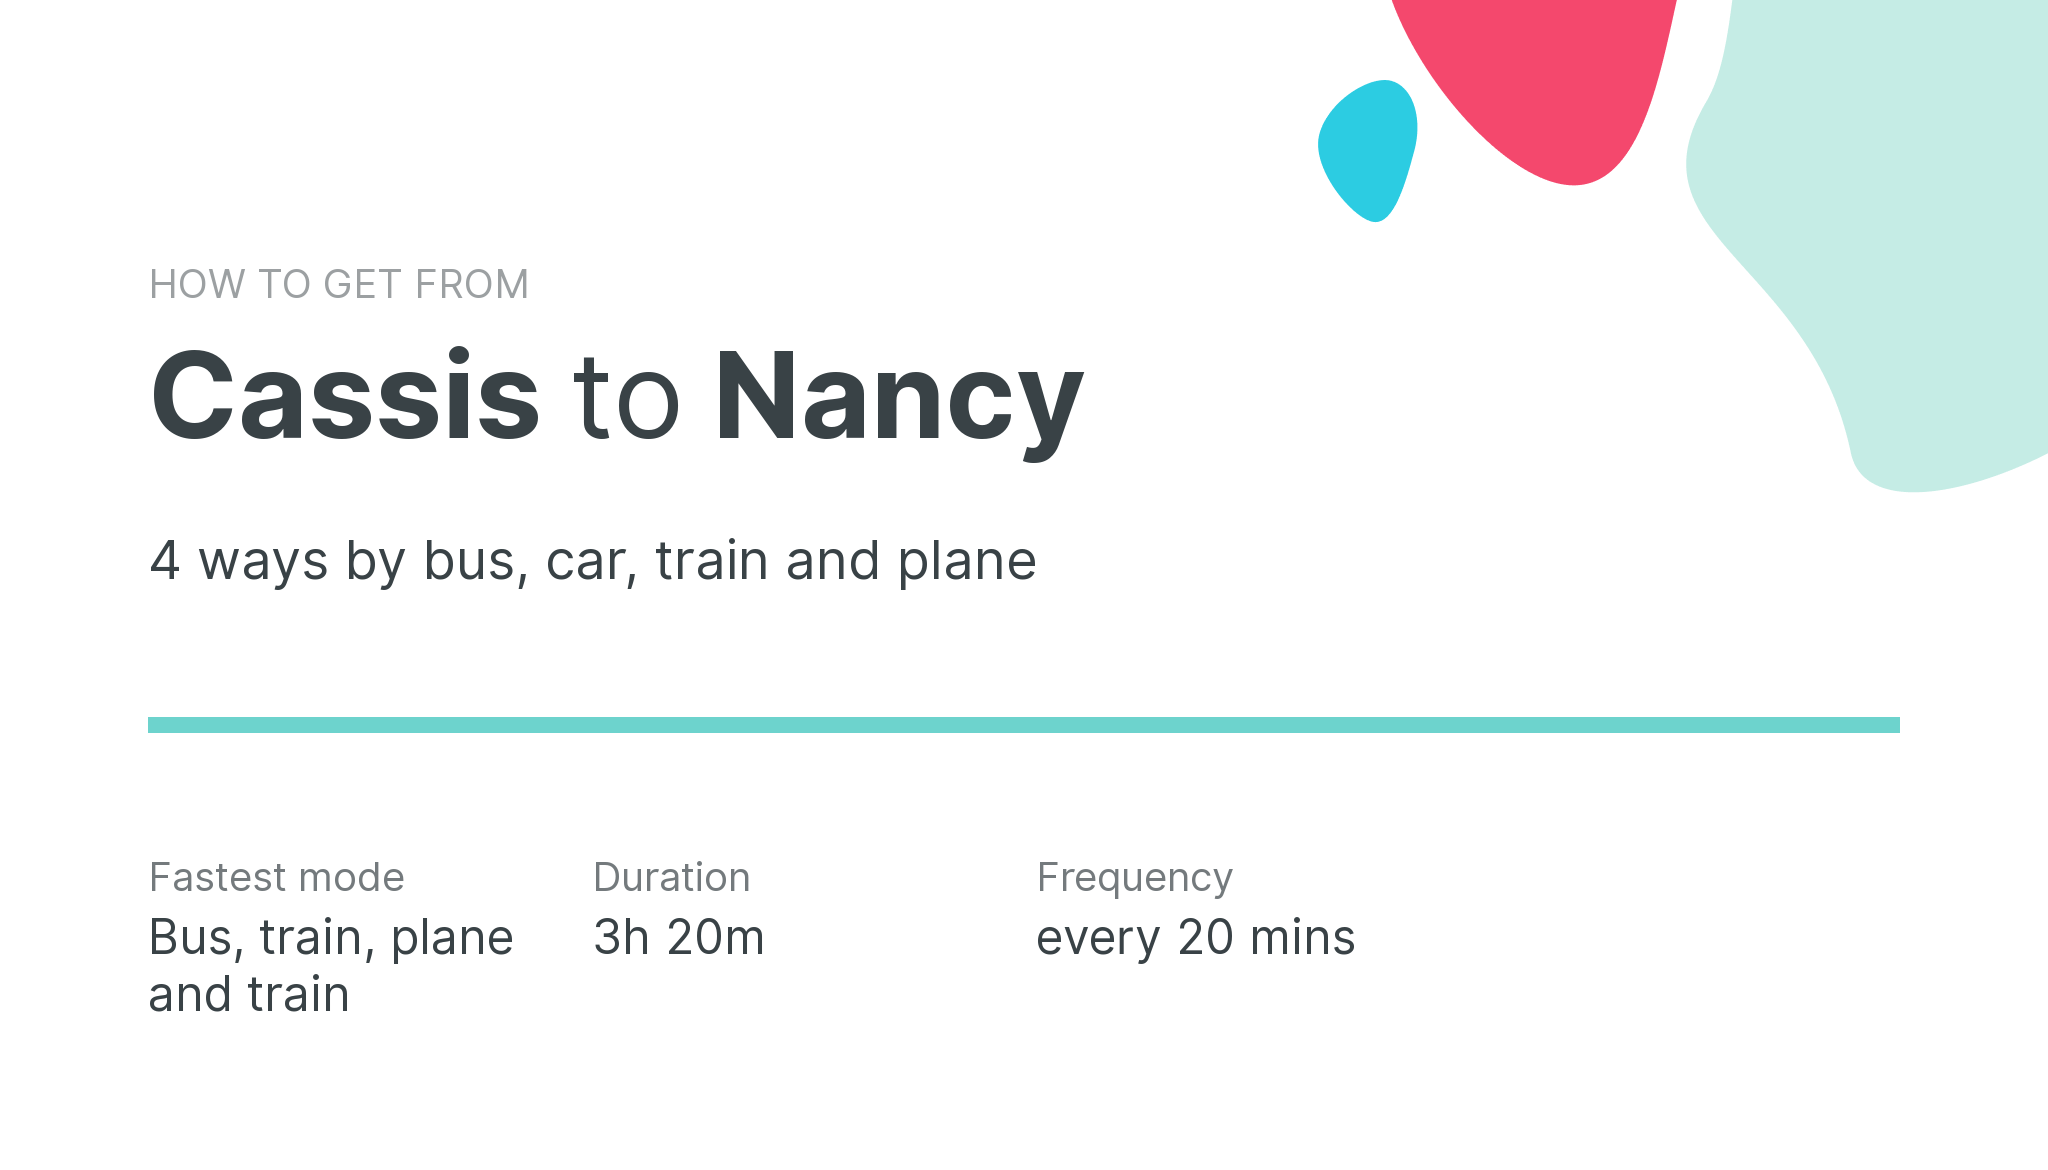 How do I get from Cassis to Nancy